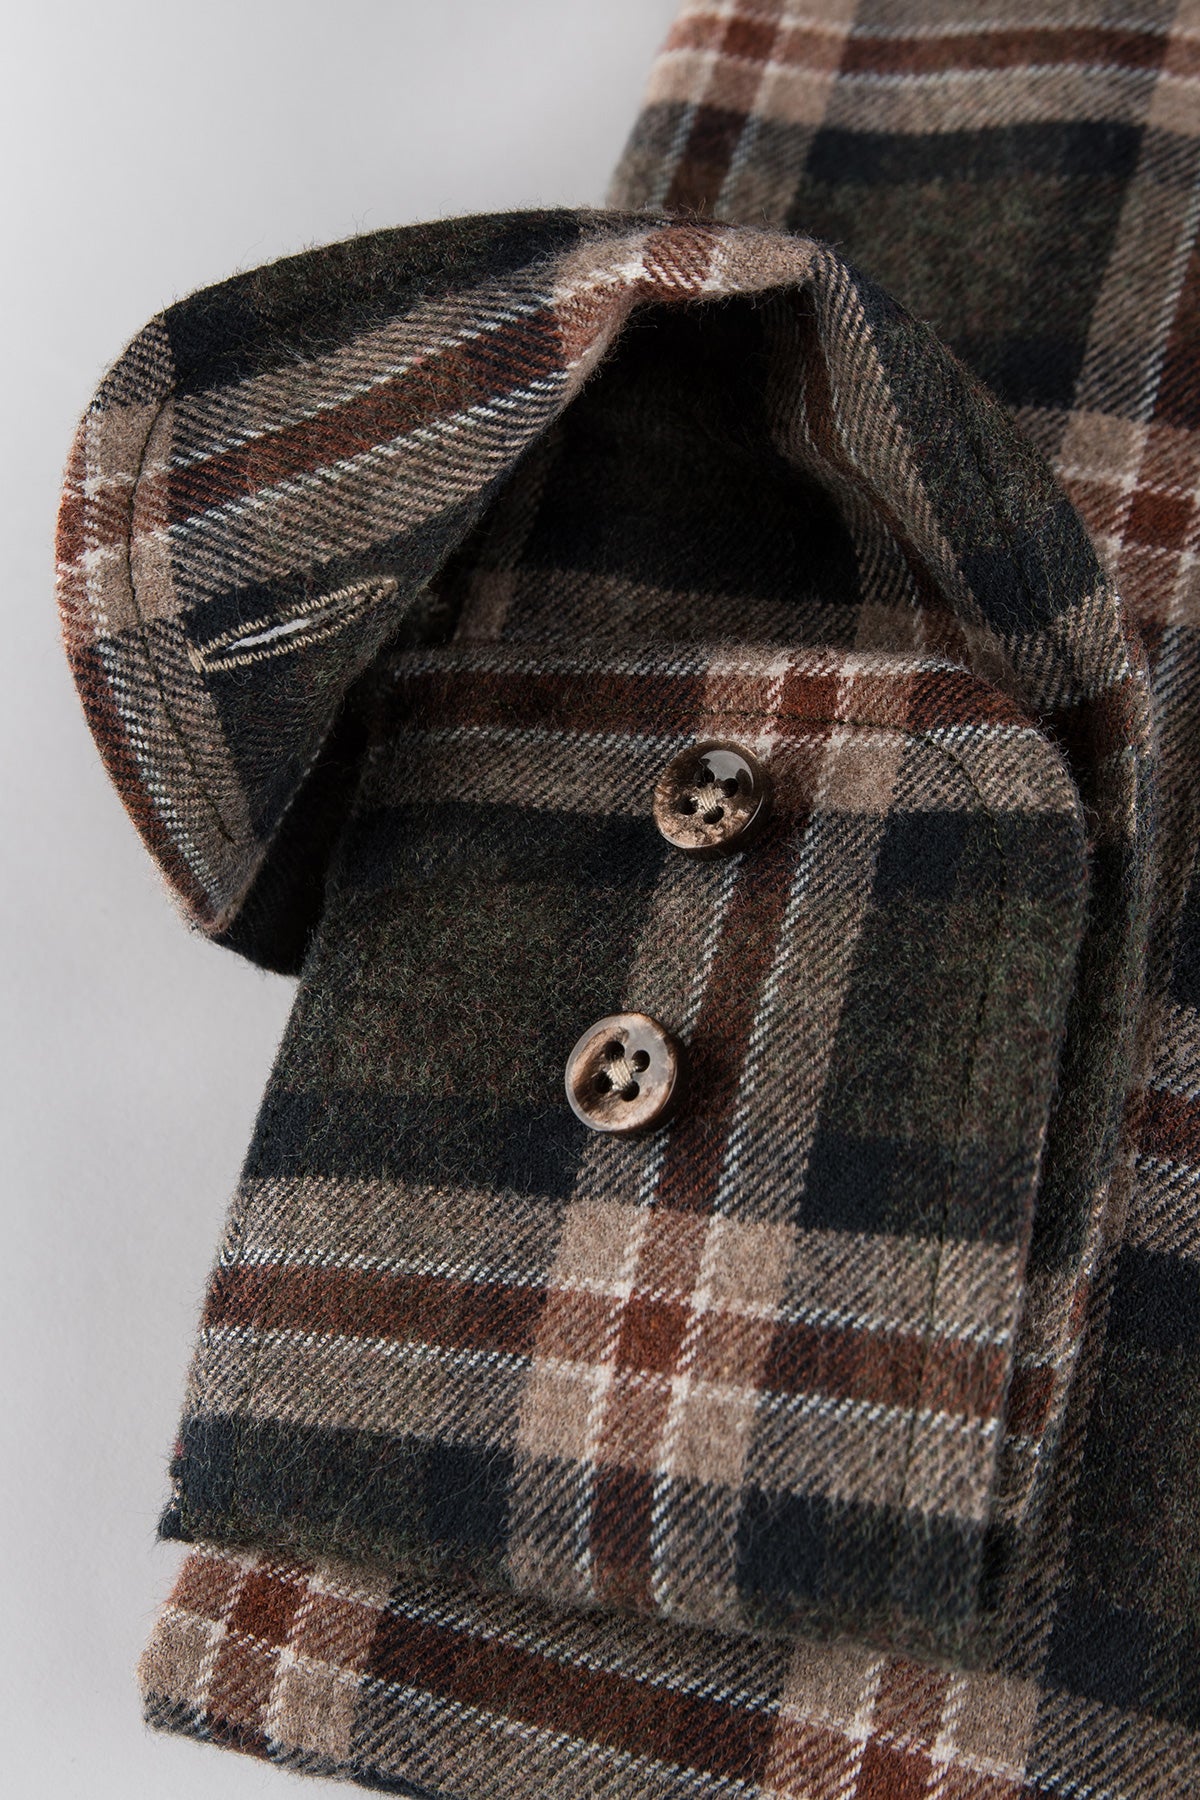 Green and brown checked flannel regular fit shirt